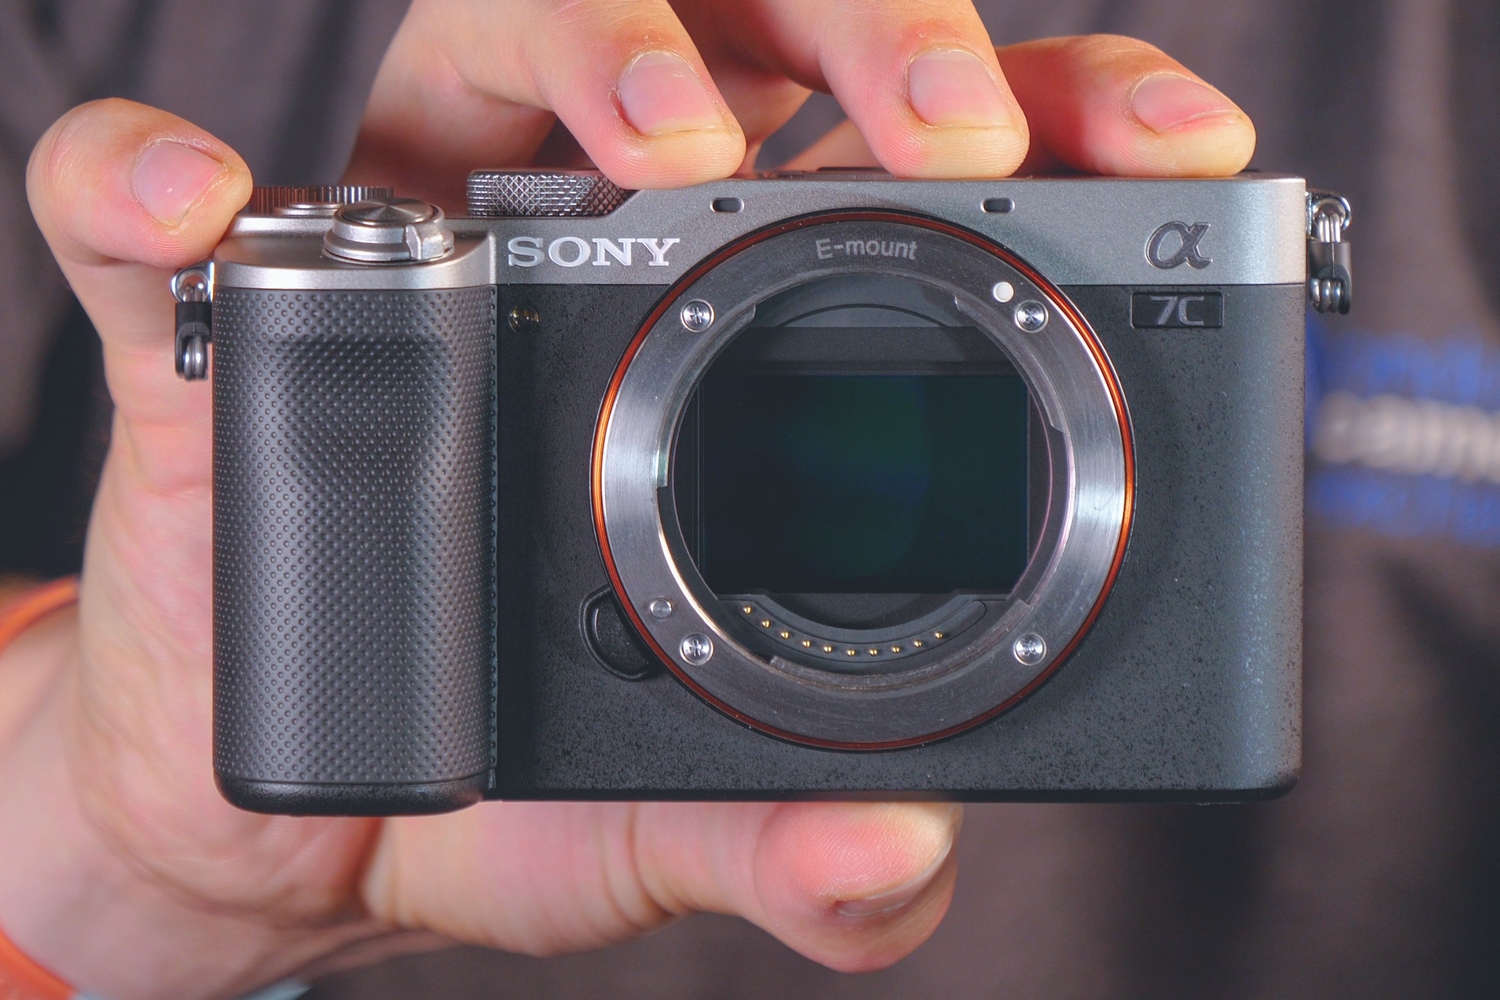 SONY A7C | THE SMALLEST ALPHA FULL-FRAME CAMERA